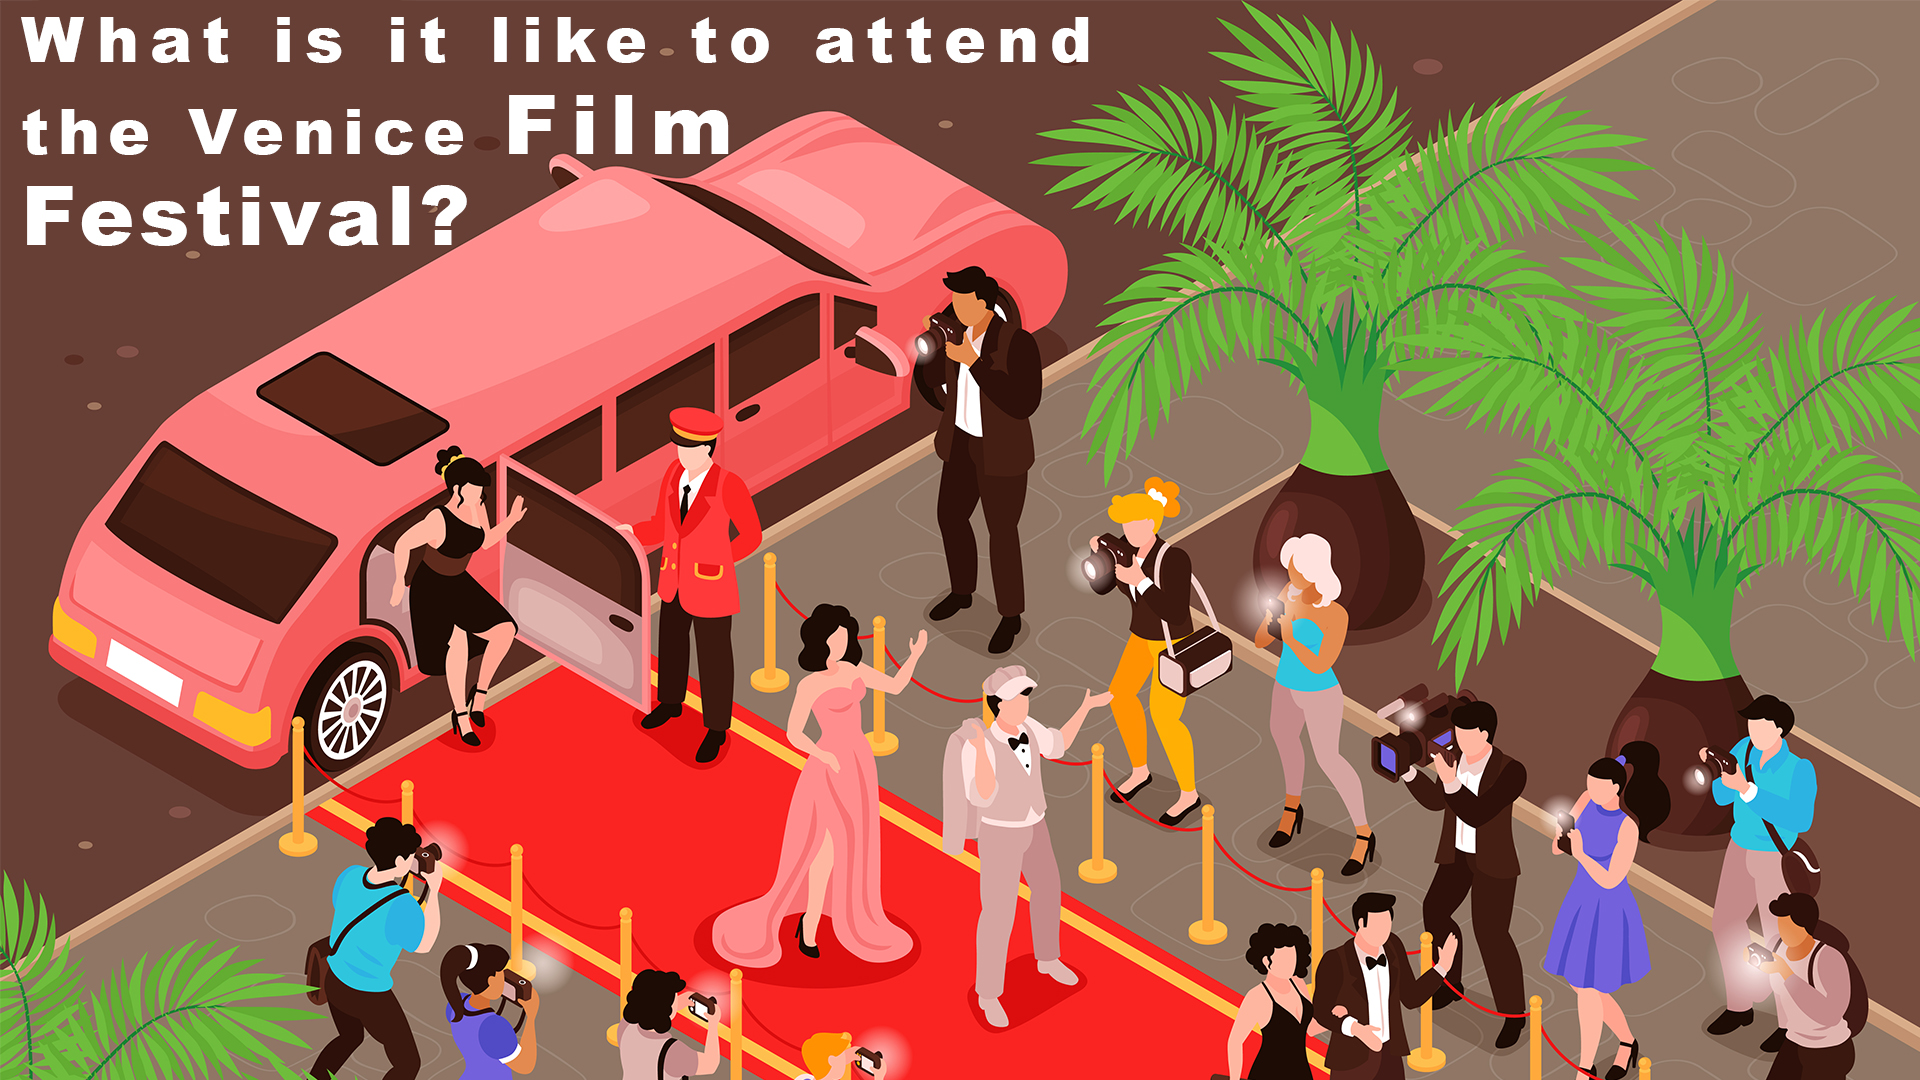 How is it like to attend the Venice Film Festival?